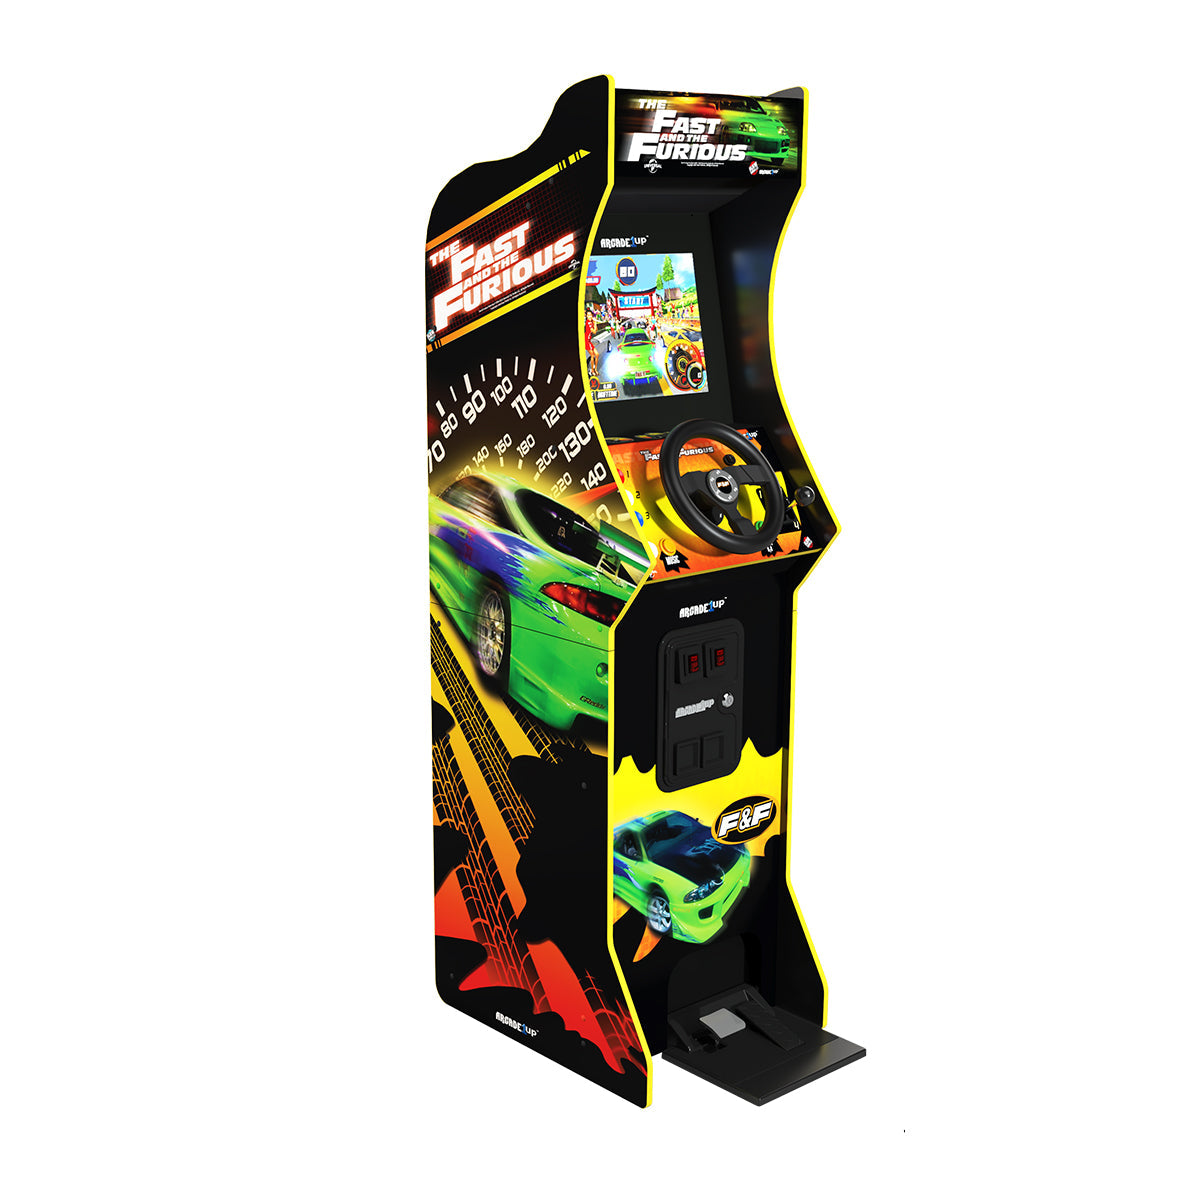 Arcade1Up The Fast &amp; The Furious Deluxe Arcade Game